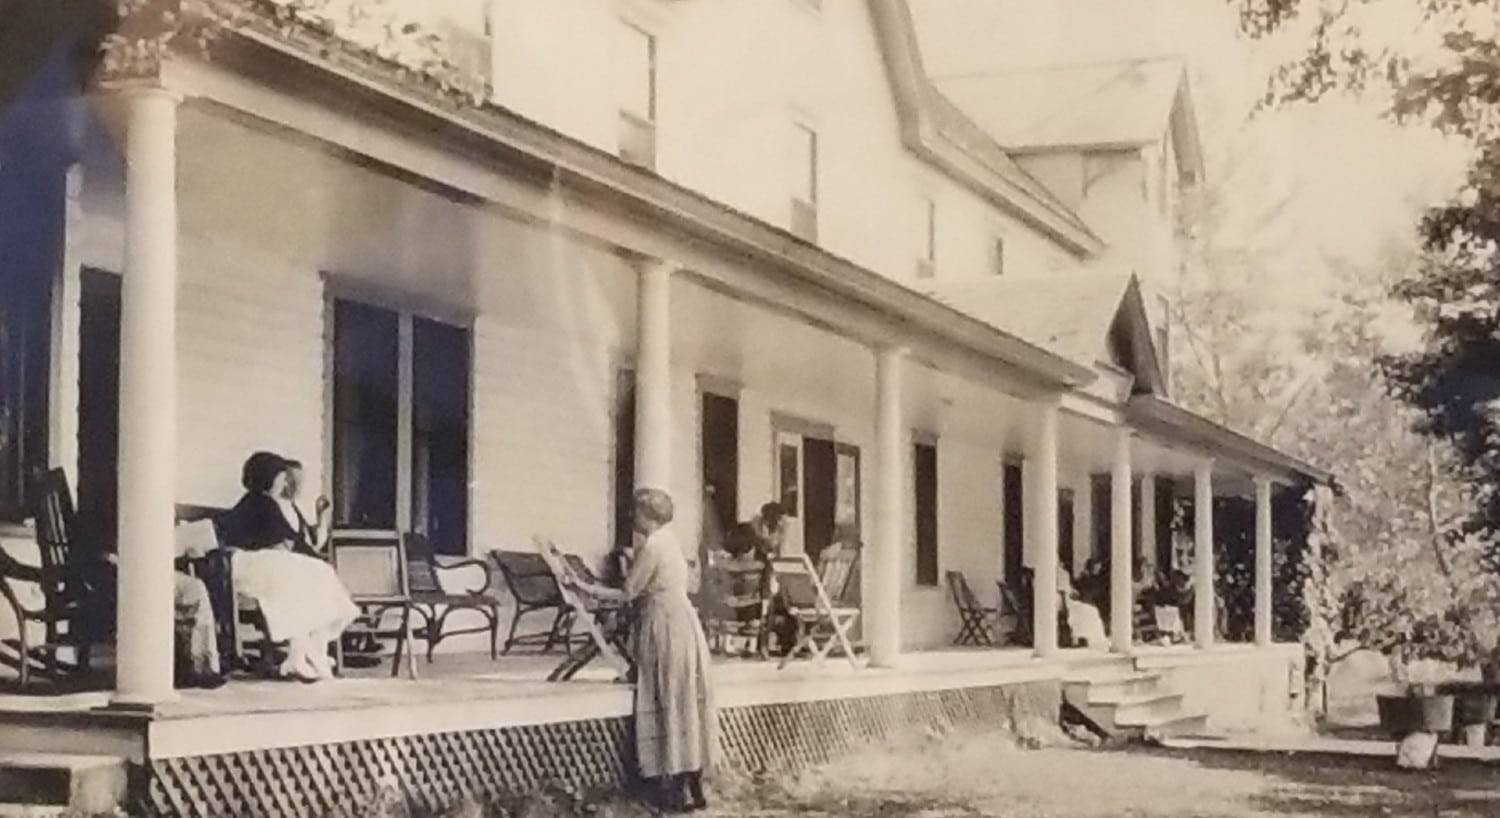 A black and white historic photograph of a large hotel with a front porch full of patio chairs and three women talking